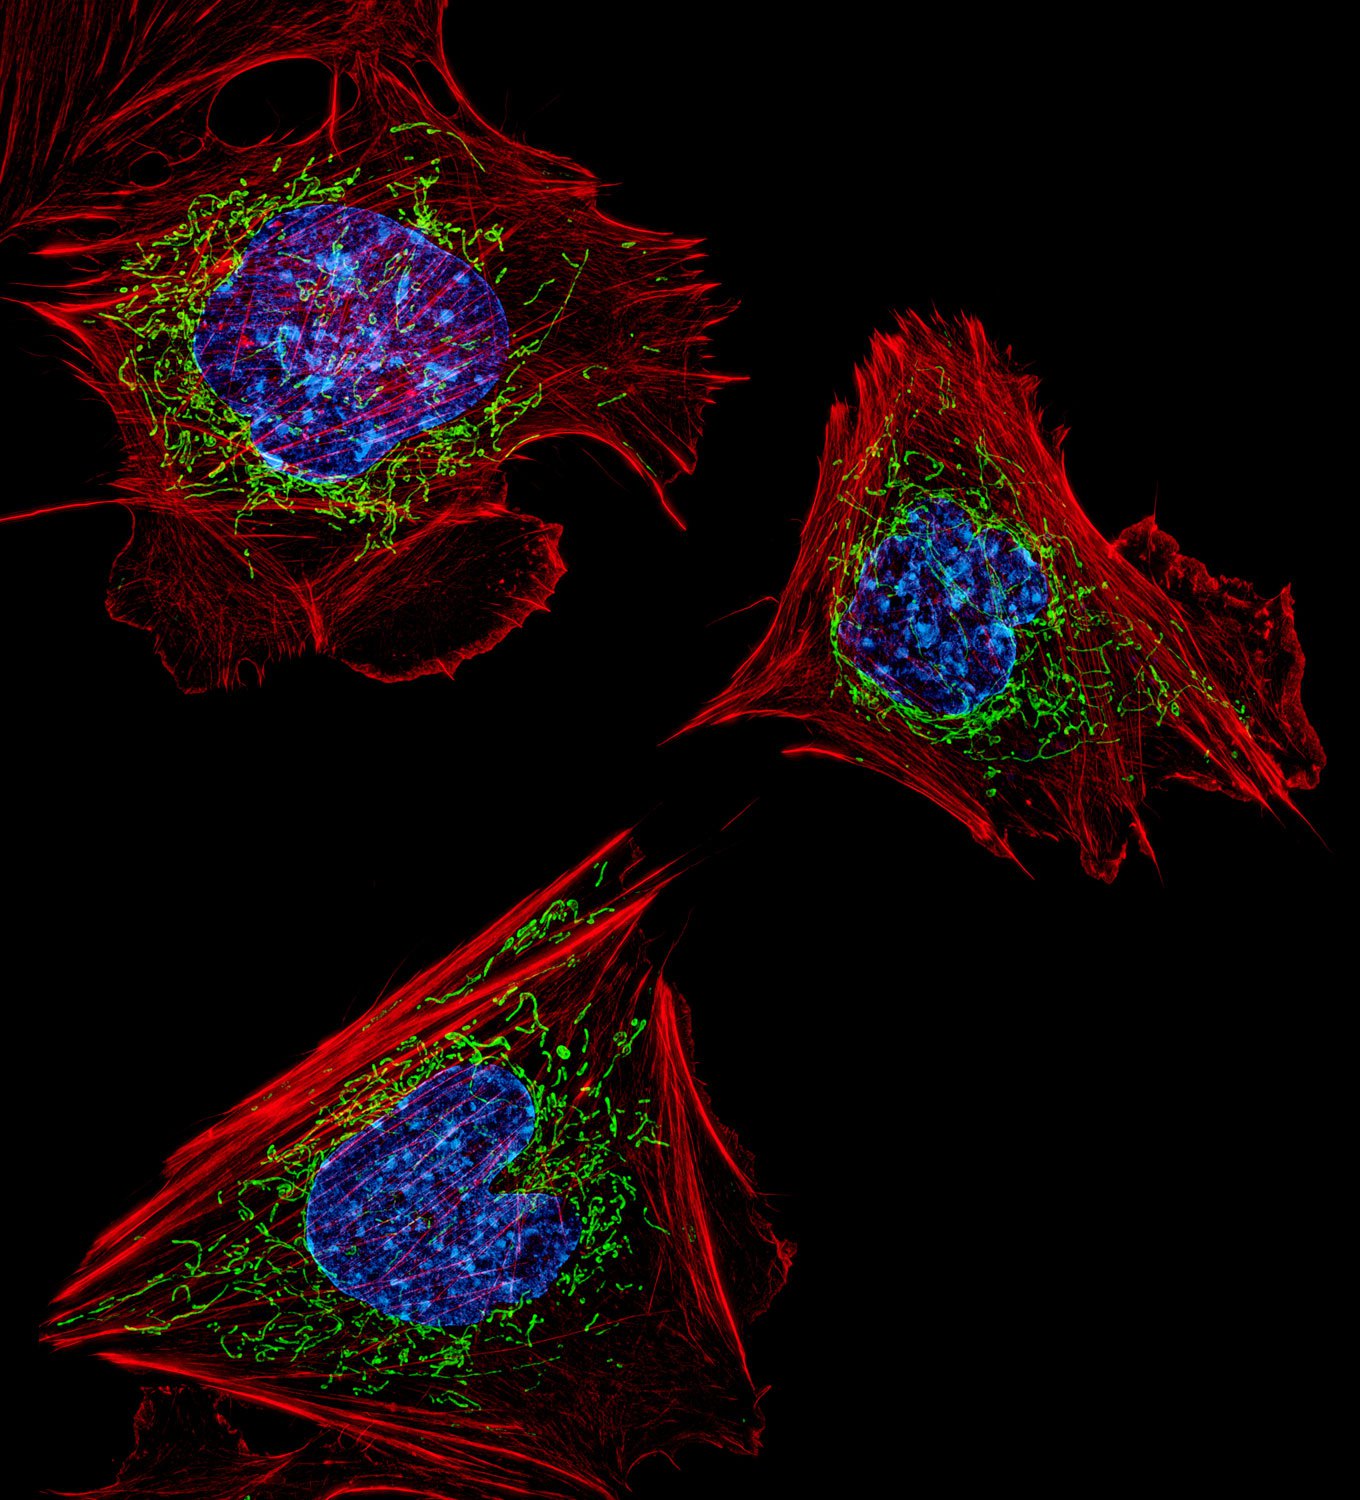 Mouse embryonic fibroblasts showing the actin filaments (red) and DNA (blue).